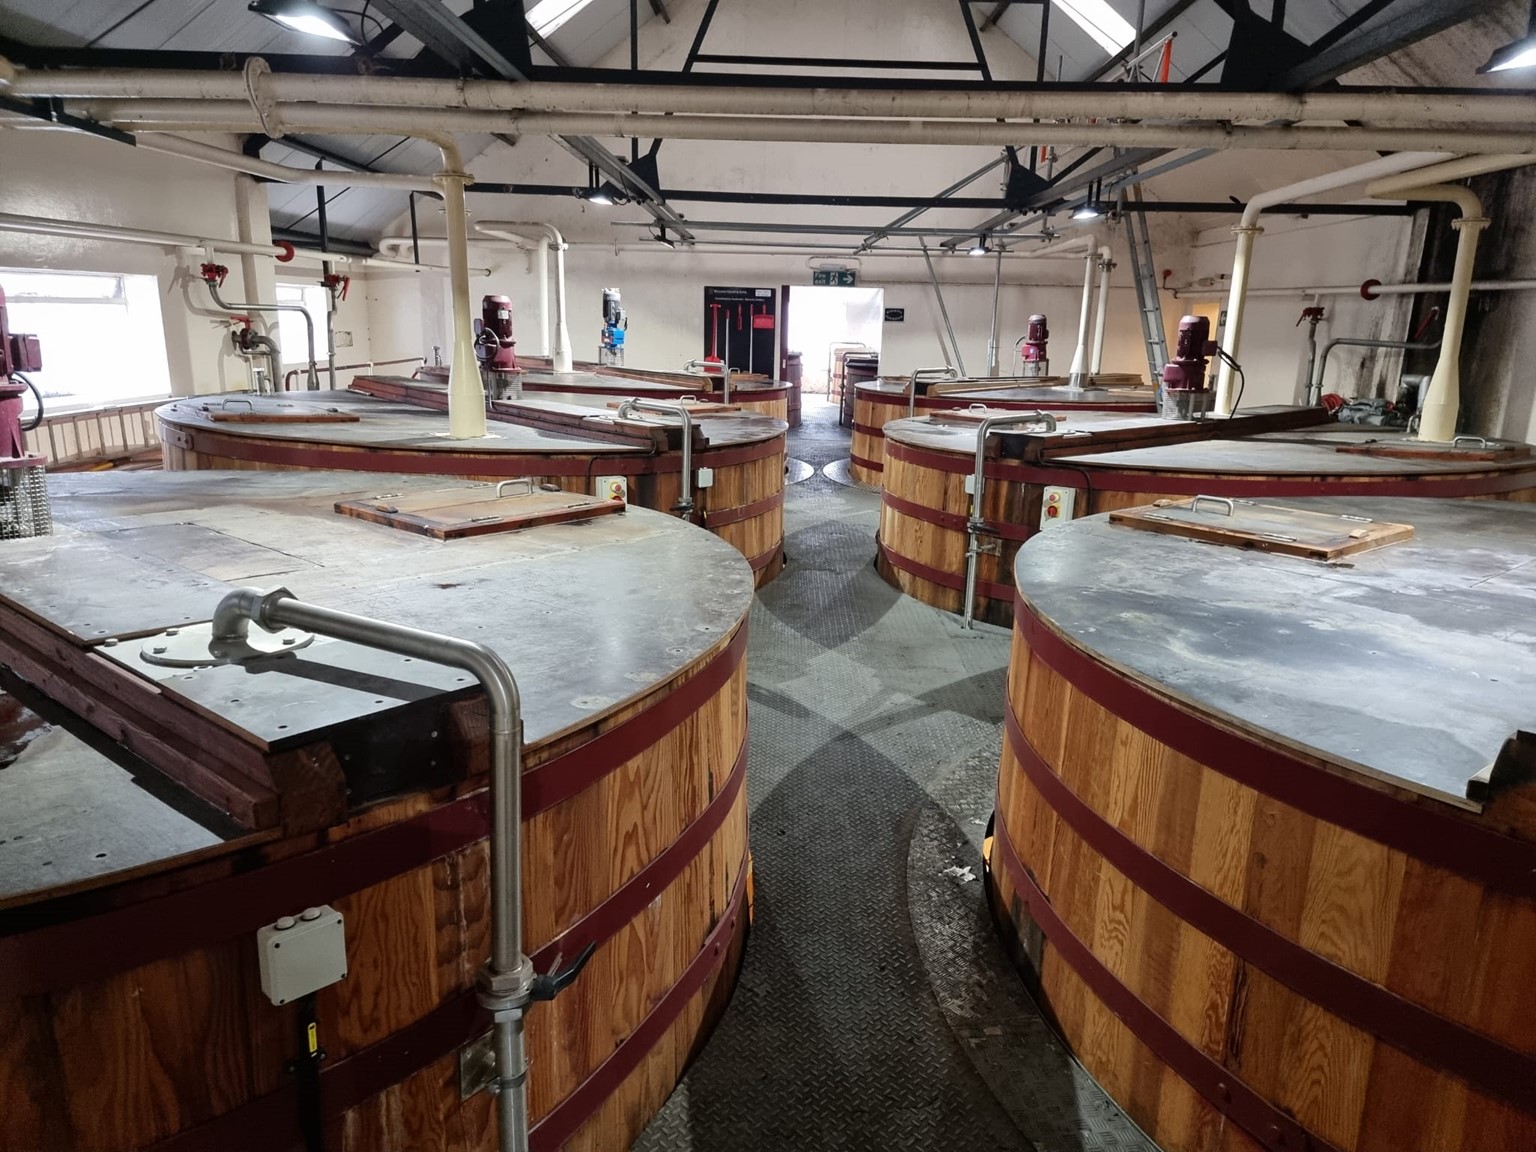 Wooden washbacks where the all-important fermentation process takes place.